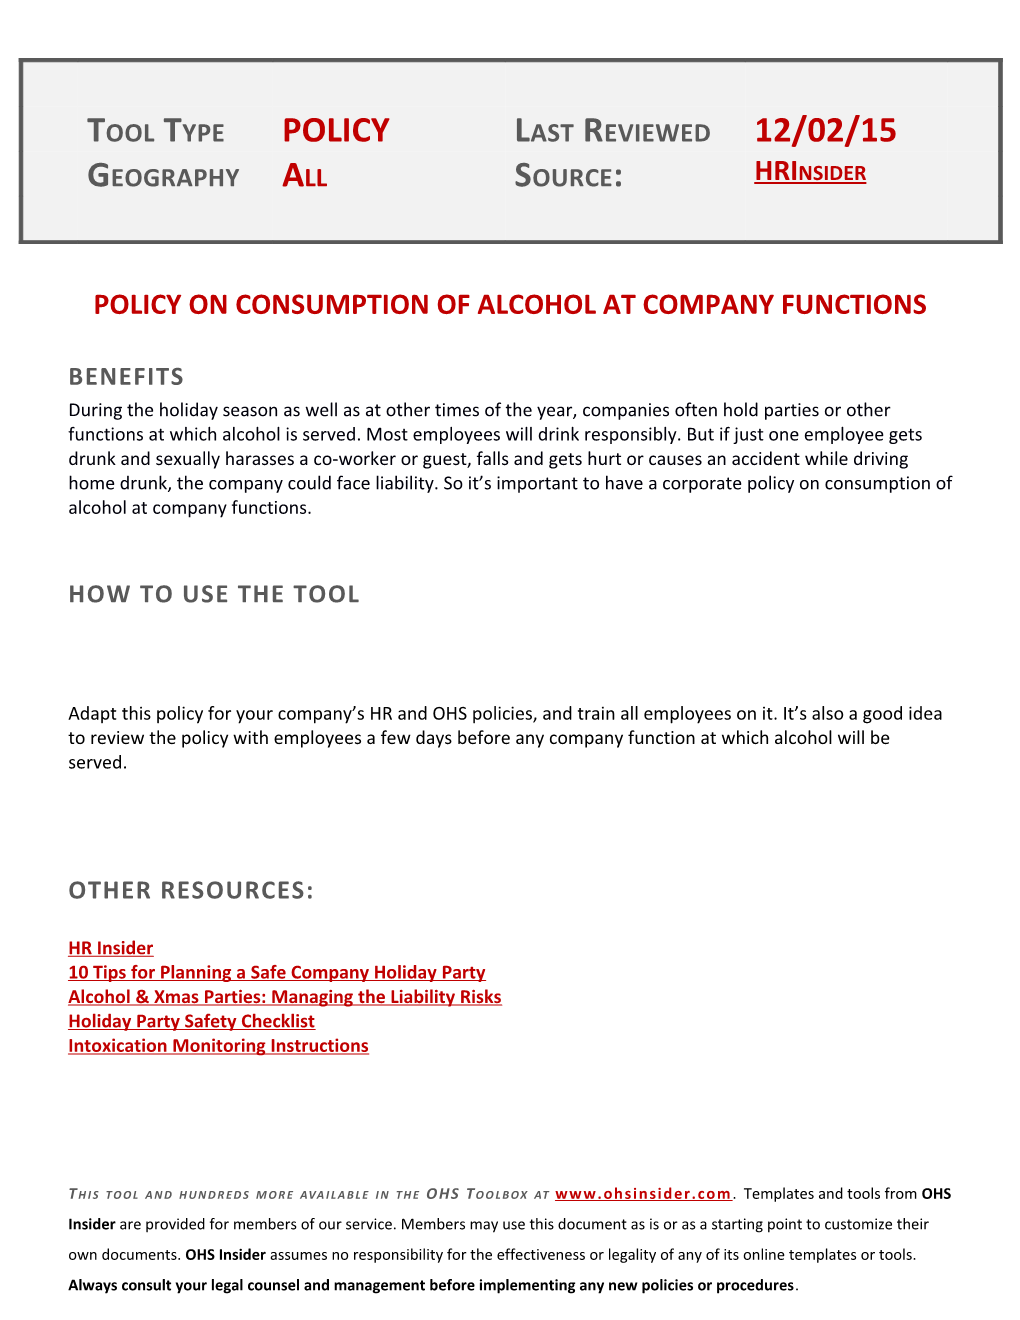 Policy on Consumption of Alcohol at Company Functions